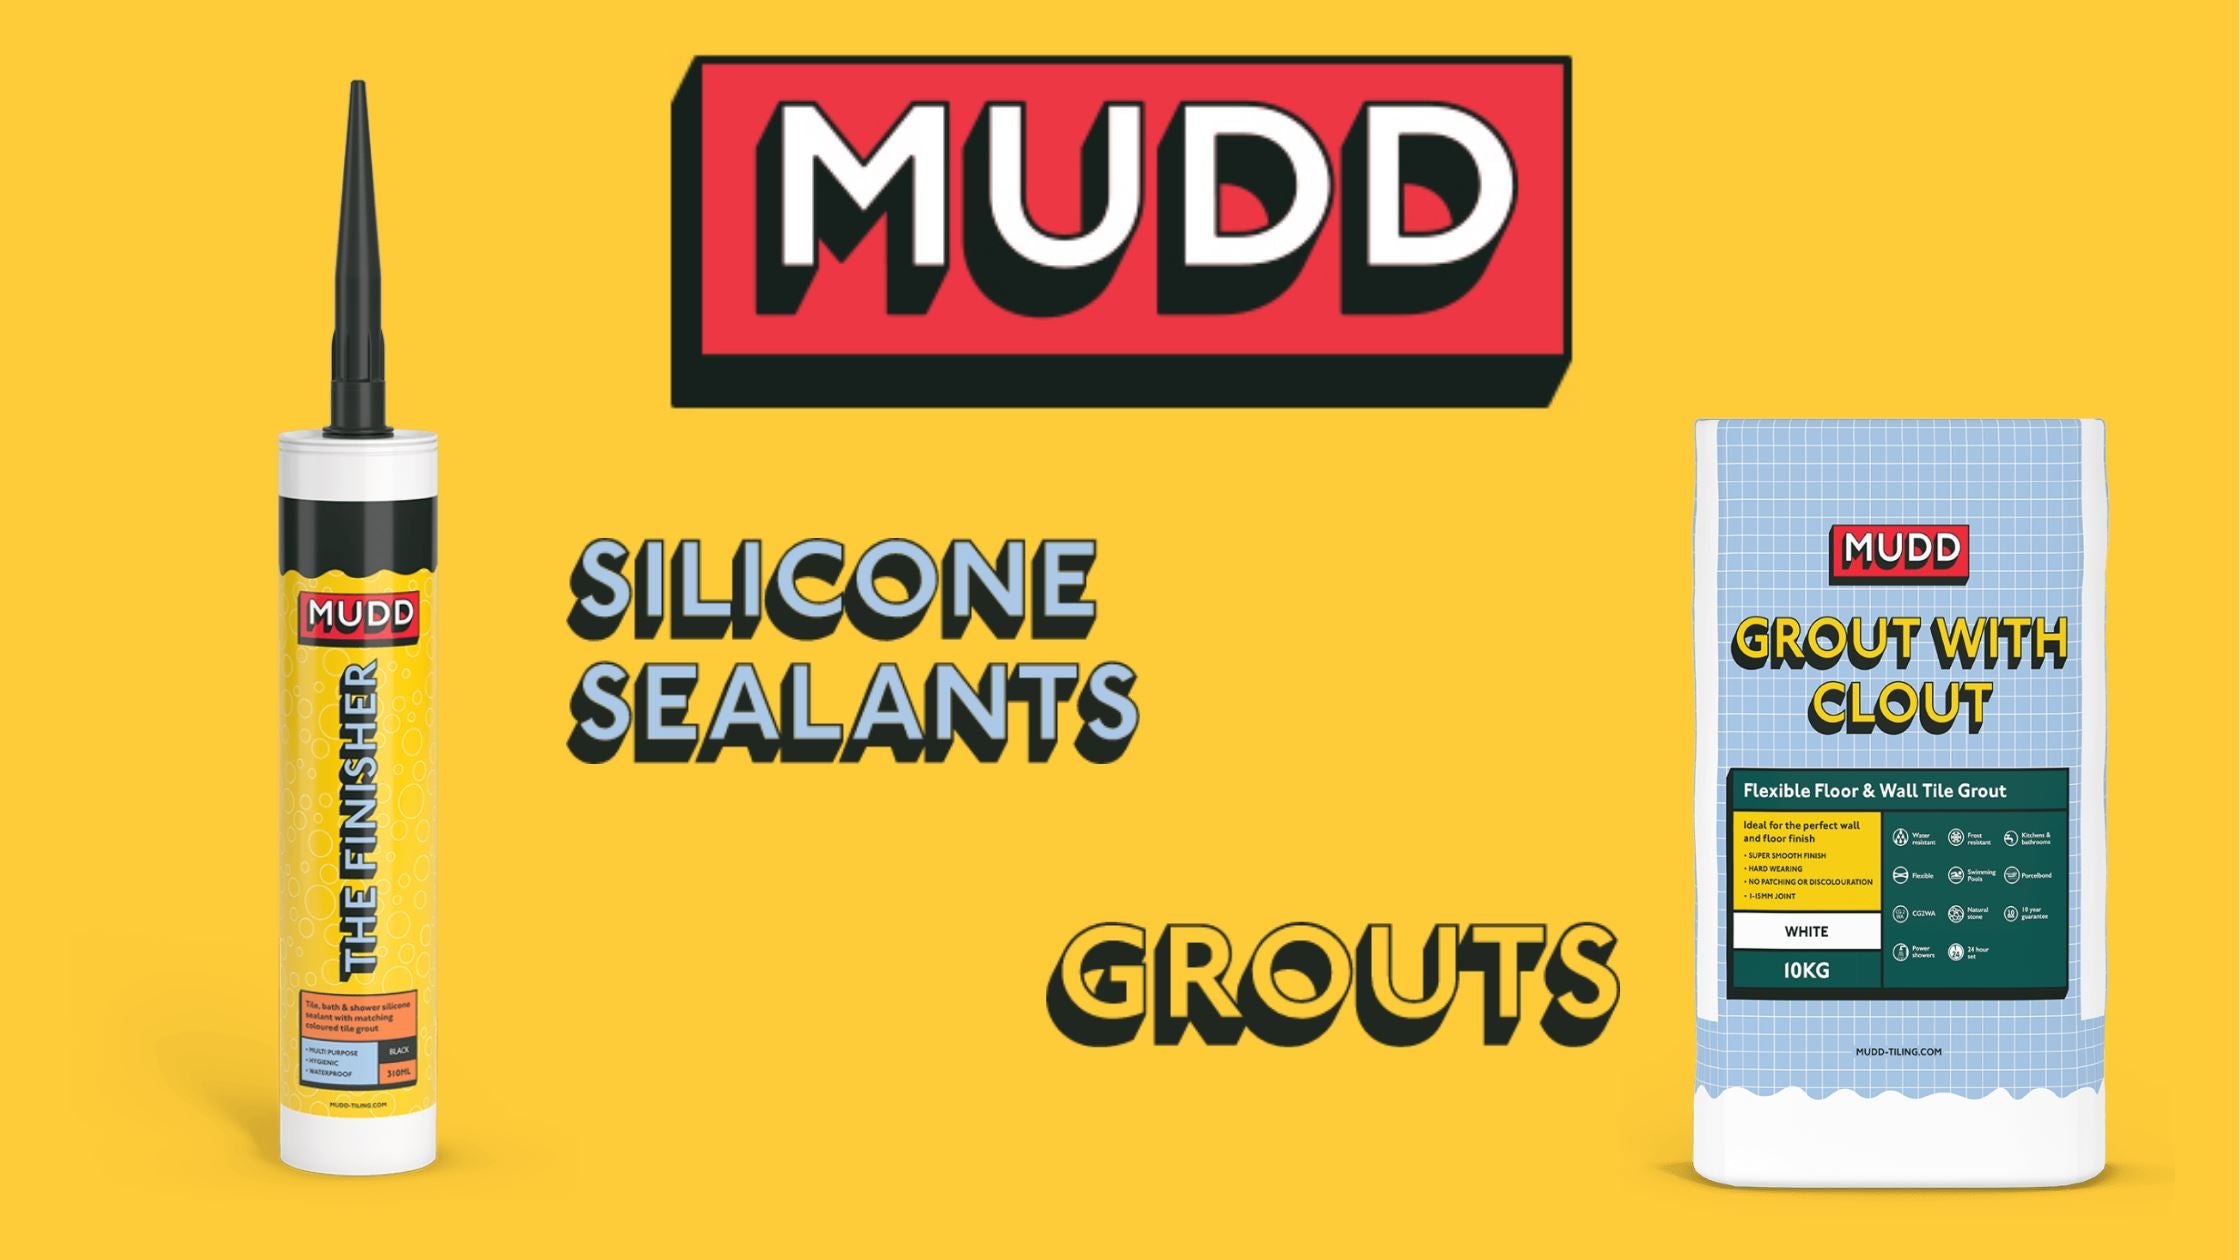 The Mudd Series Part 3: Time to Grout